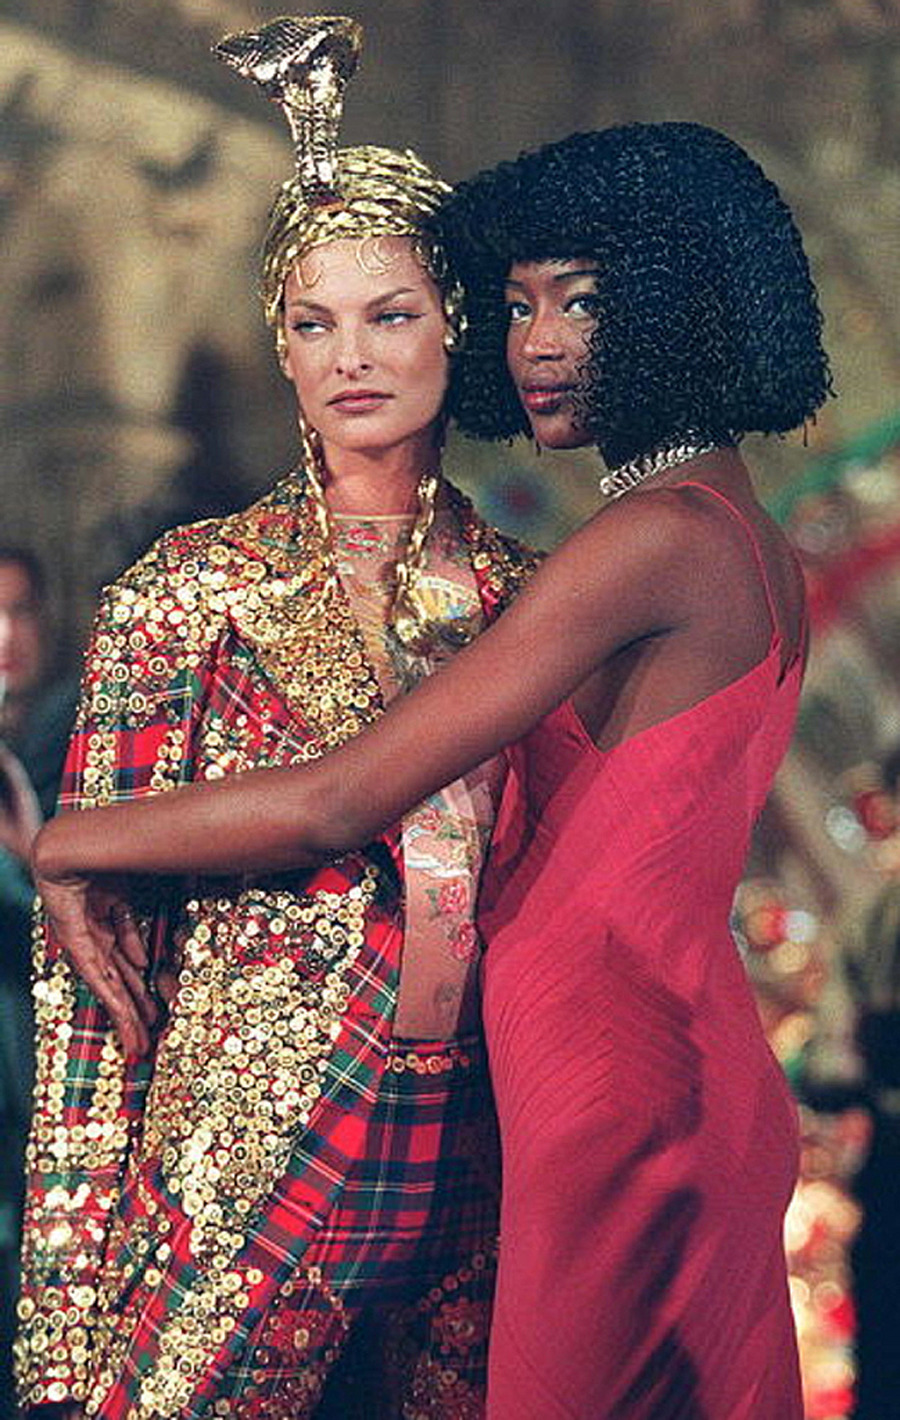 Les Incroyables — John Galliano Fall Winter 1997 Ready-to-Wear “The